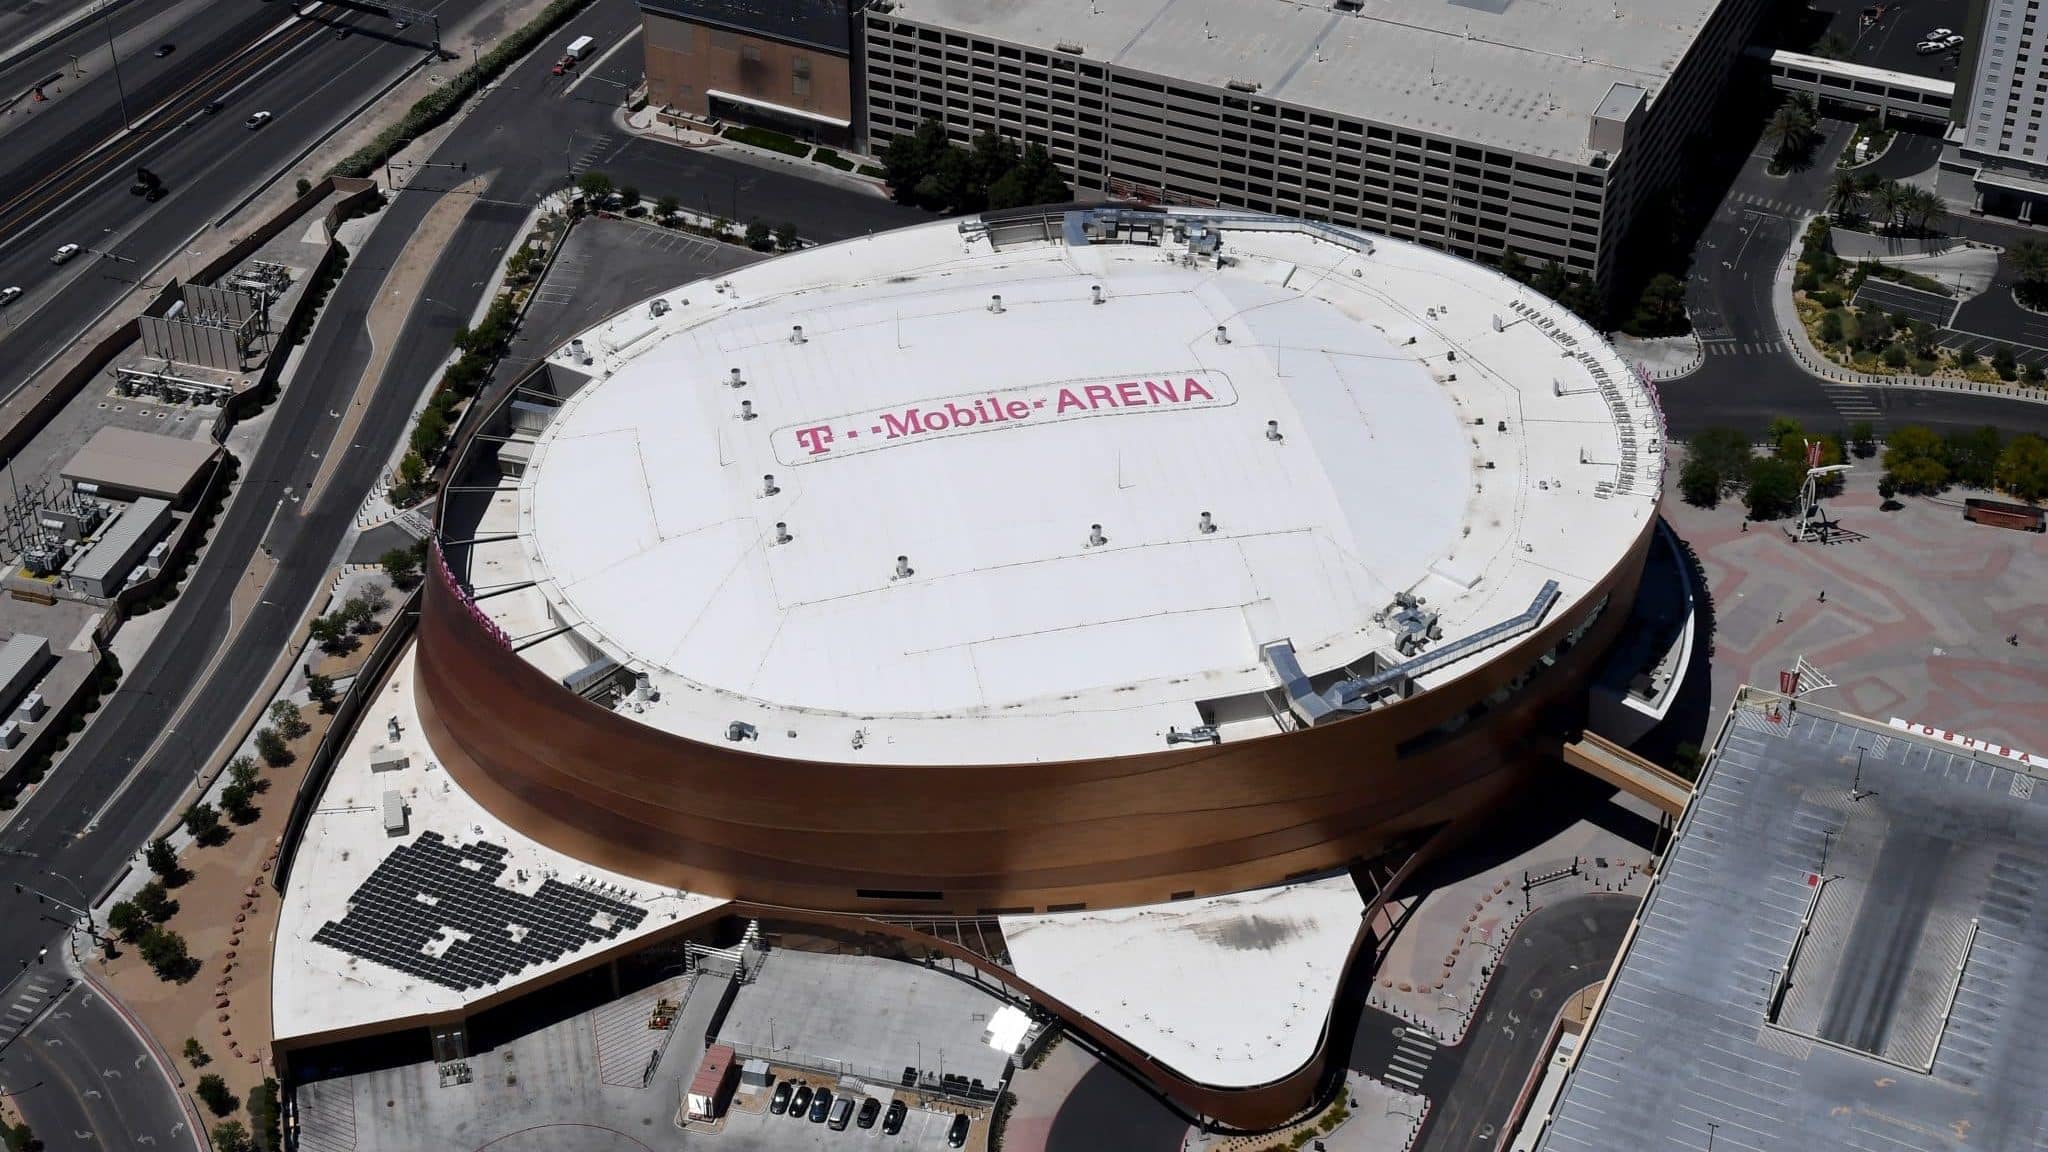 LAS VEGAS, NEVADA - MAY 21: An aerial view shows T-Mobile Arena, home of the NHL's Vegas Golden Knights, which has been closed since March 17 in response to the coronavirus (COVID-19) pandemic on May 21, 2020 in Las Vegas, Nevada. It is still unclear if the NHL will be able to finish the season that was paused as a result of COVID-19.